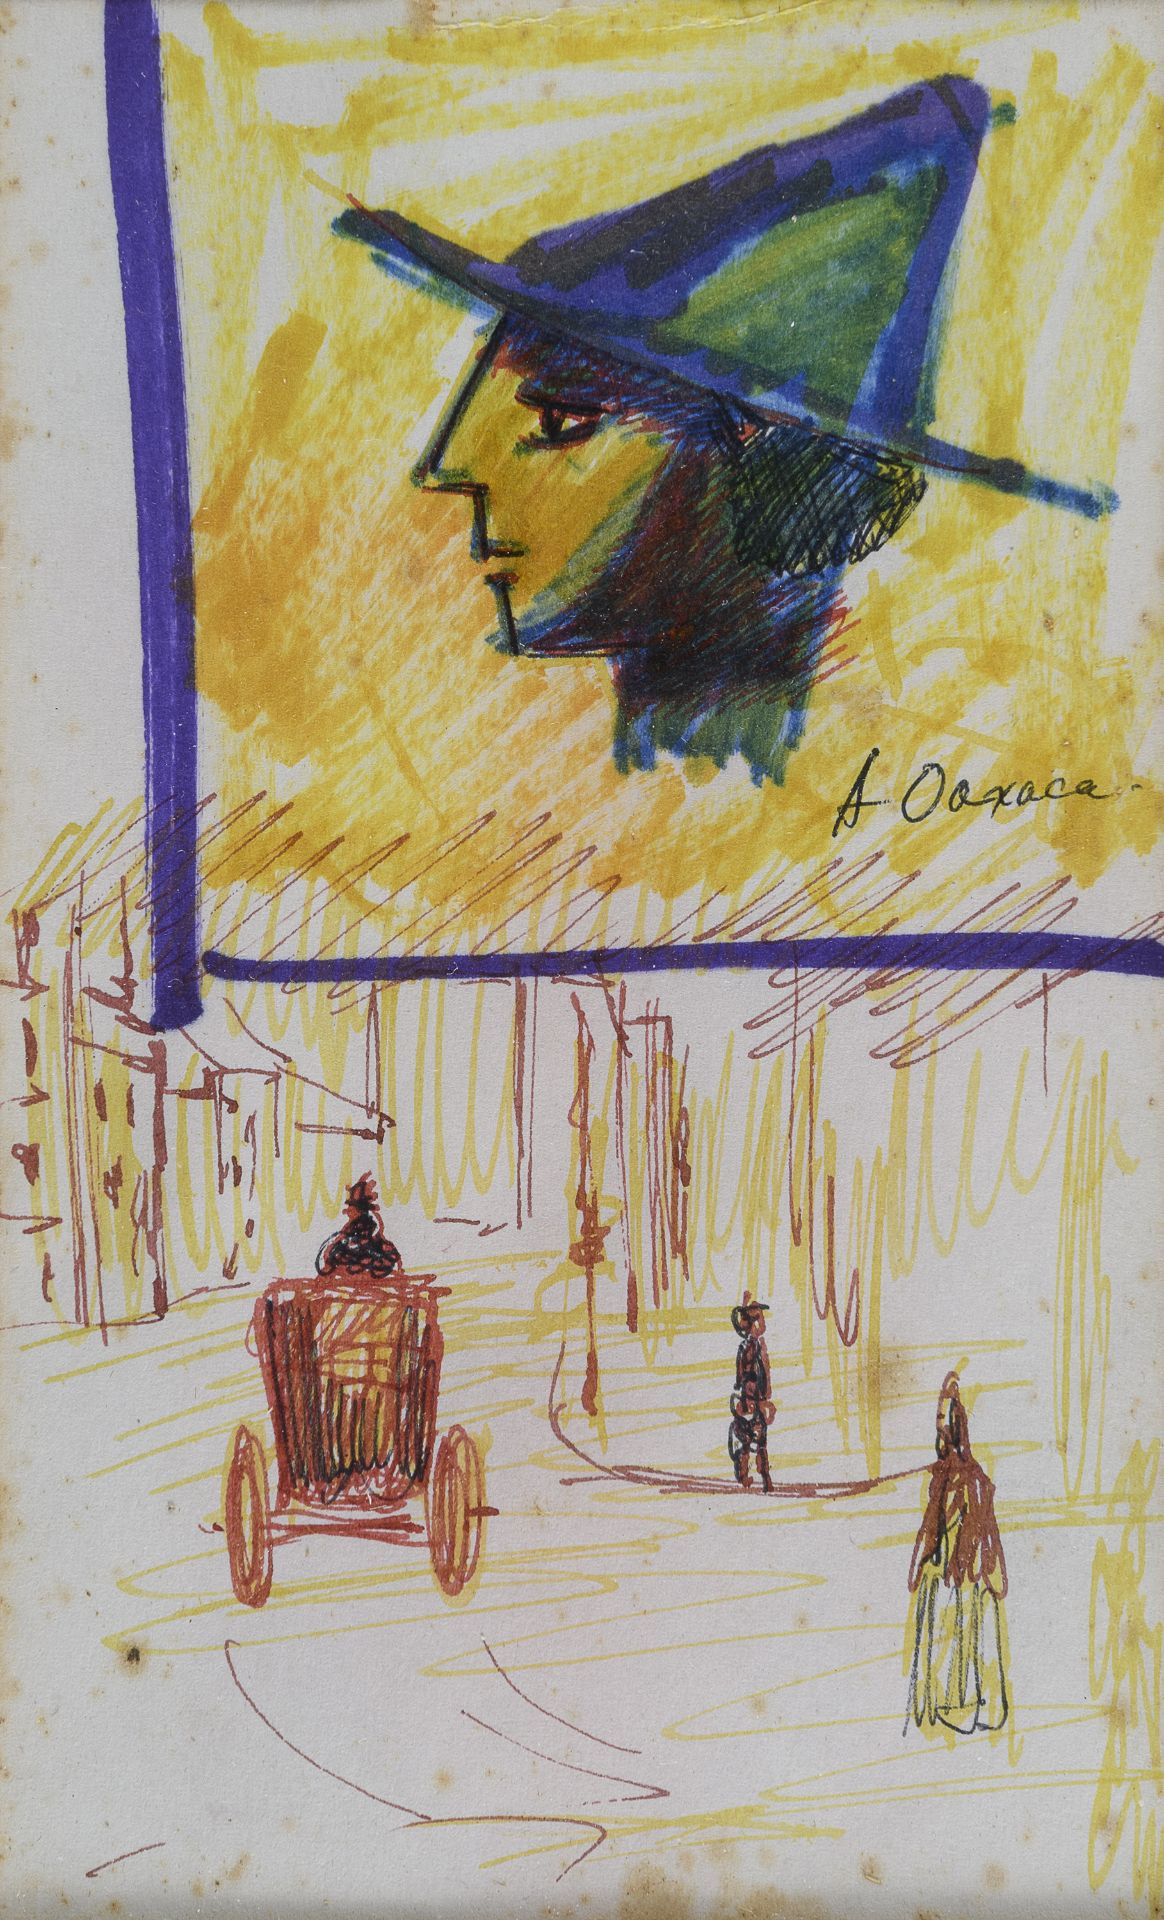 DRAWING PROFILE AND CARRIAGE STUDIES BY ANTHONY QUINN